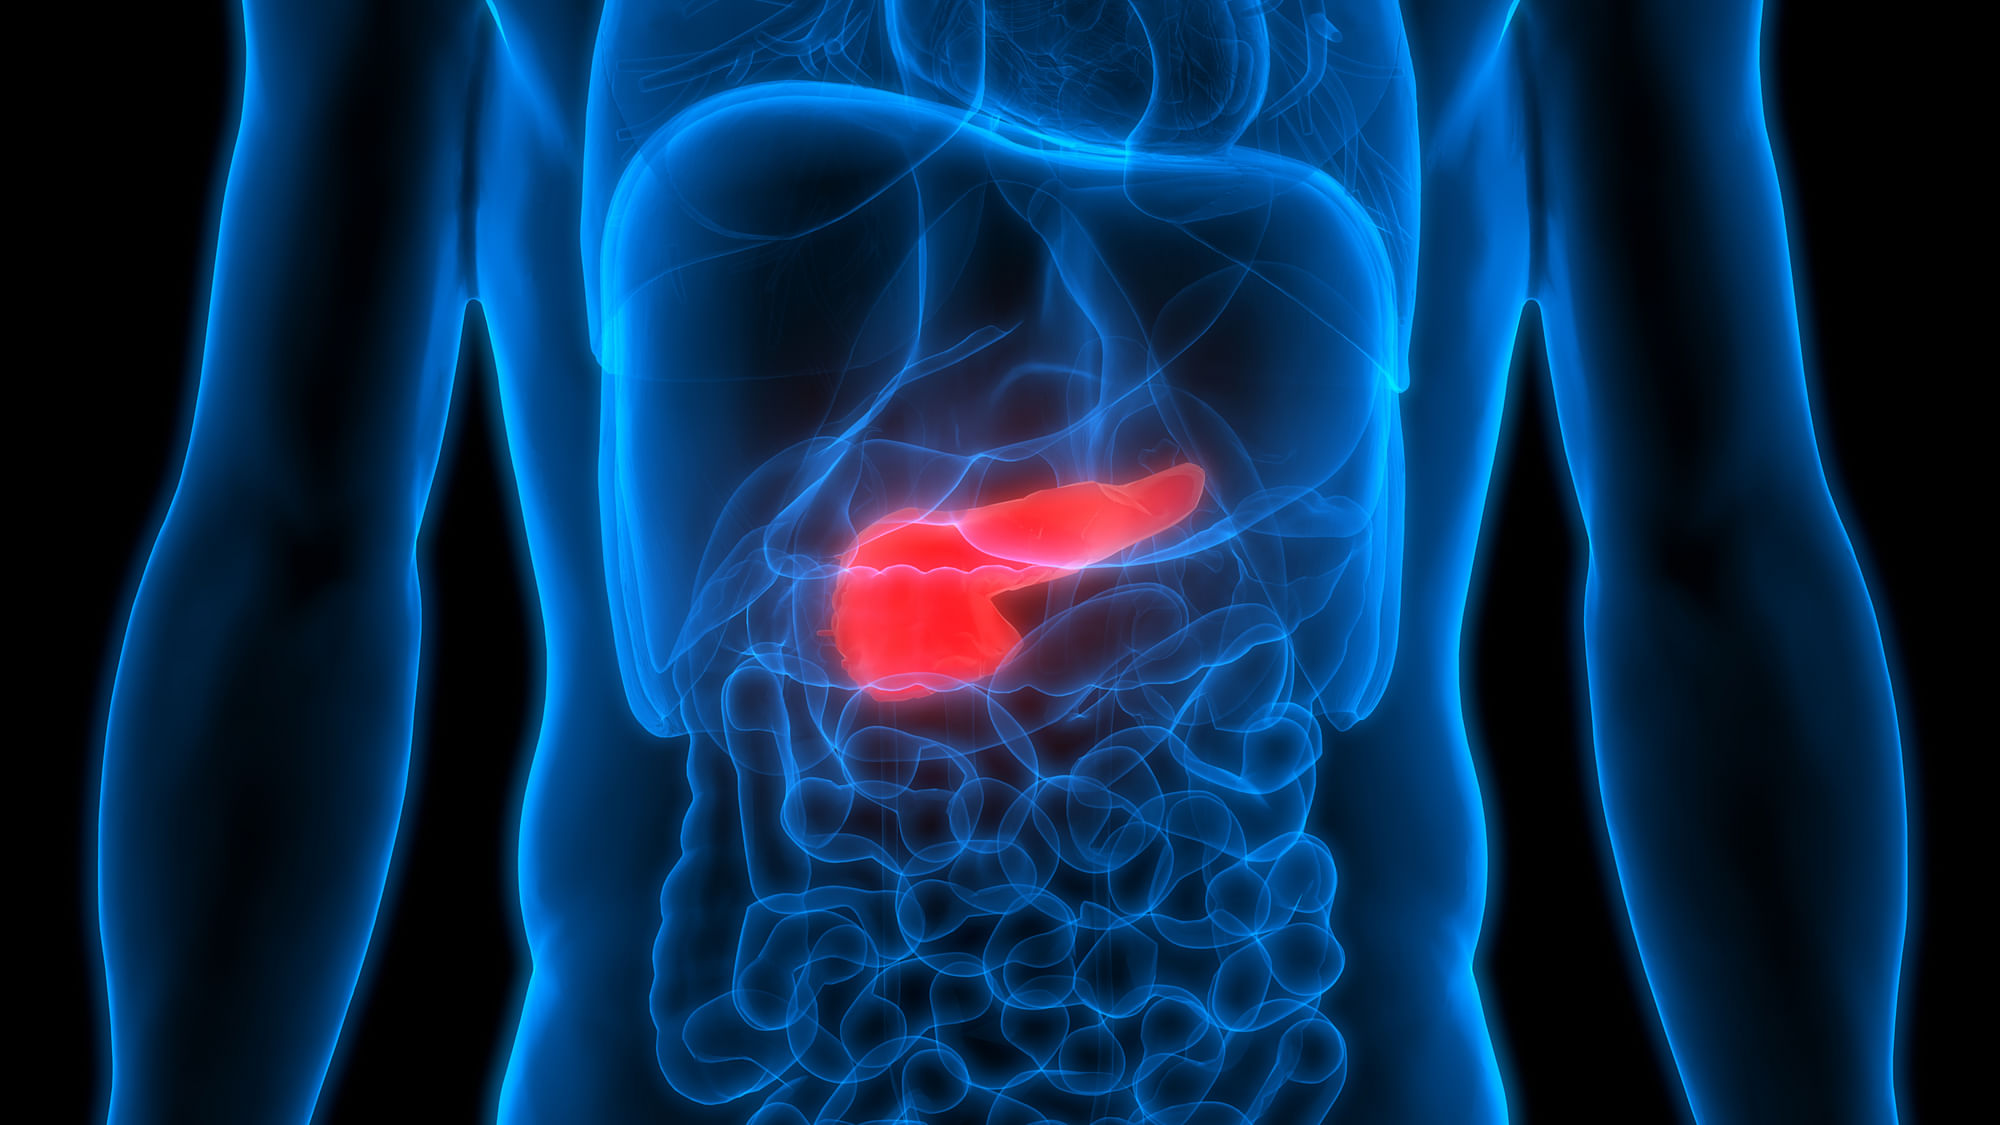 According to the study, incidence rates for colorectal and pancreatic cancer both increased by 10 per cent between 1990 and 2017